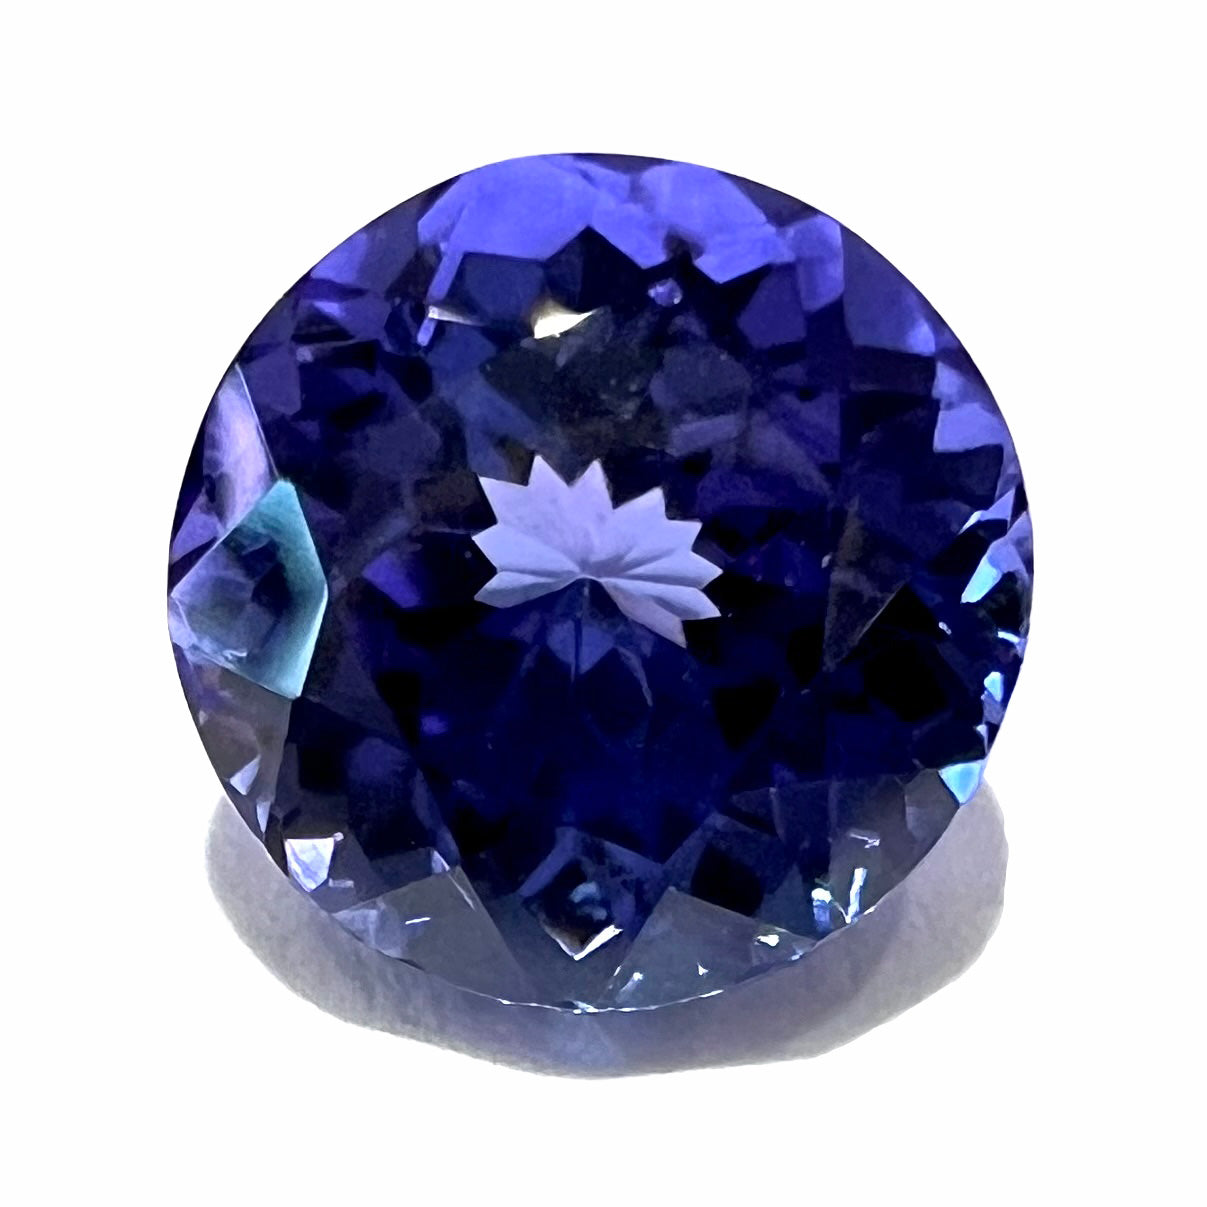 A loose, natural tanzanite gemstone.  The stone is round brilliant cut and weighs 2.42 carats.